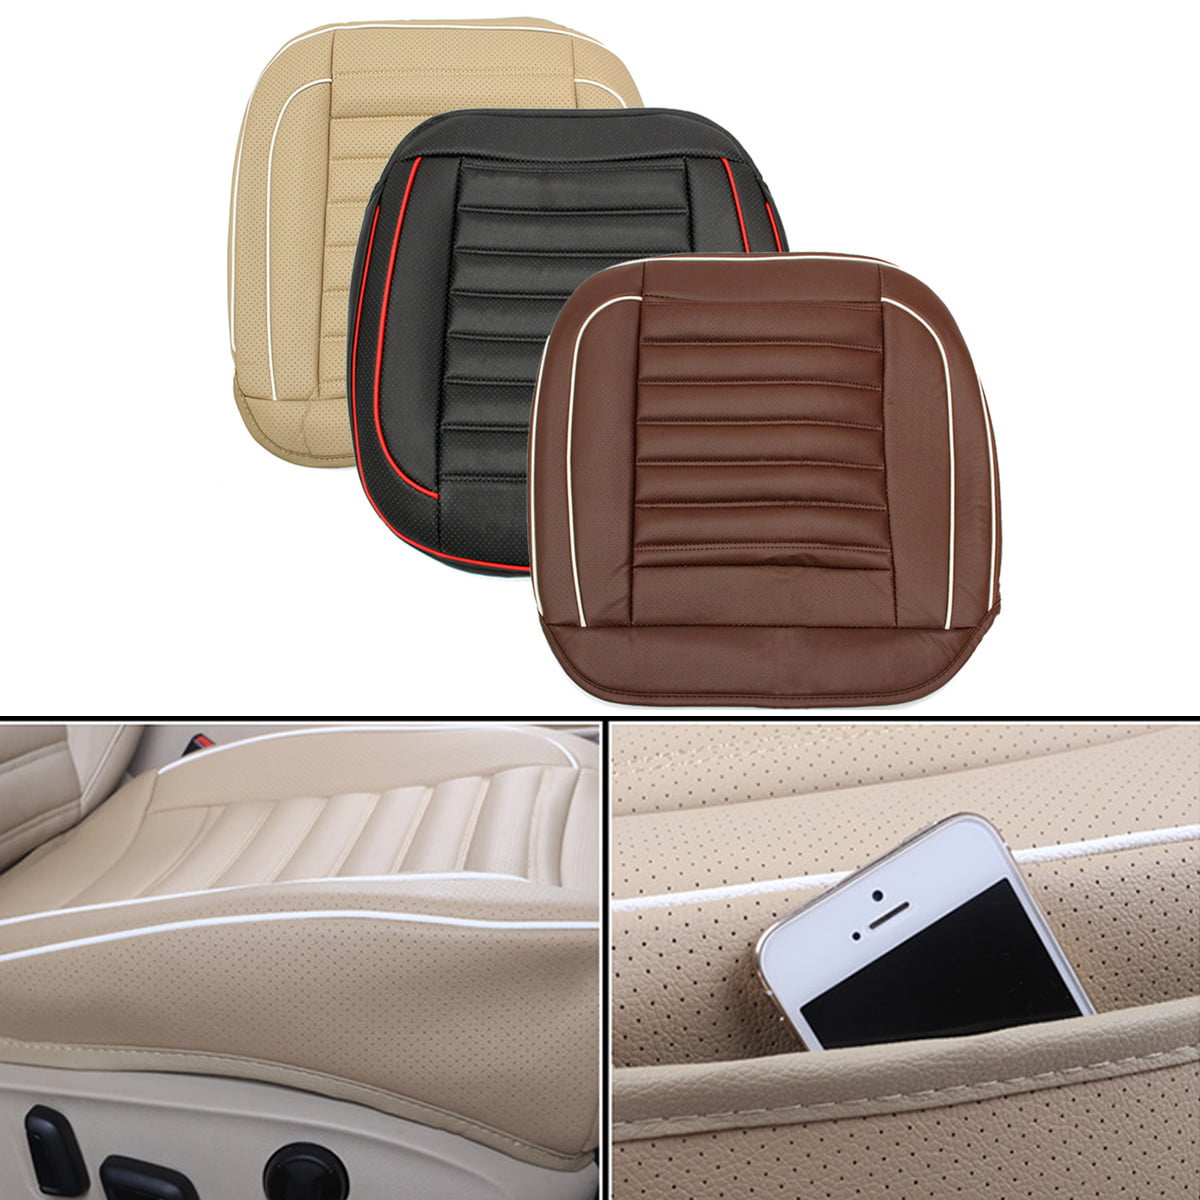 UHeng 2 PCS Car Seat Protector Cushion Cover Pad Mat Breathable for Auto